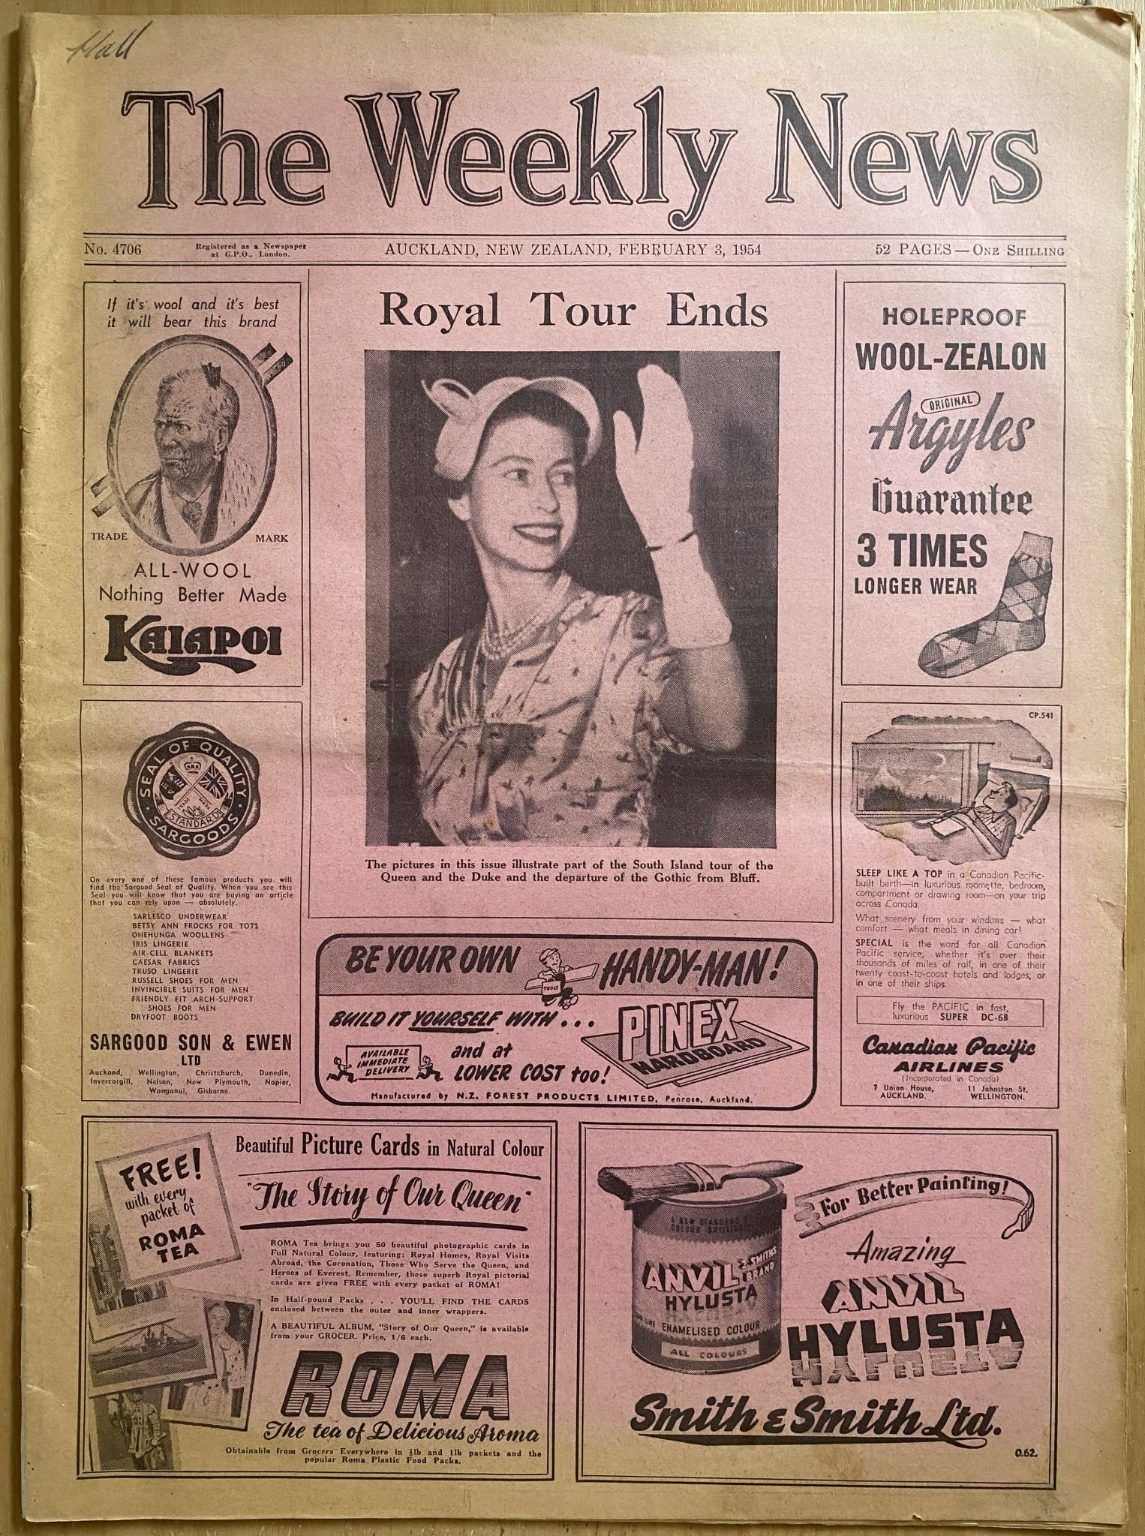 OLD NEWSPAPER: The Weekly News - No. 4706, 3 February 1954